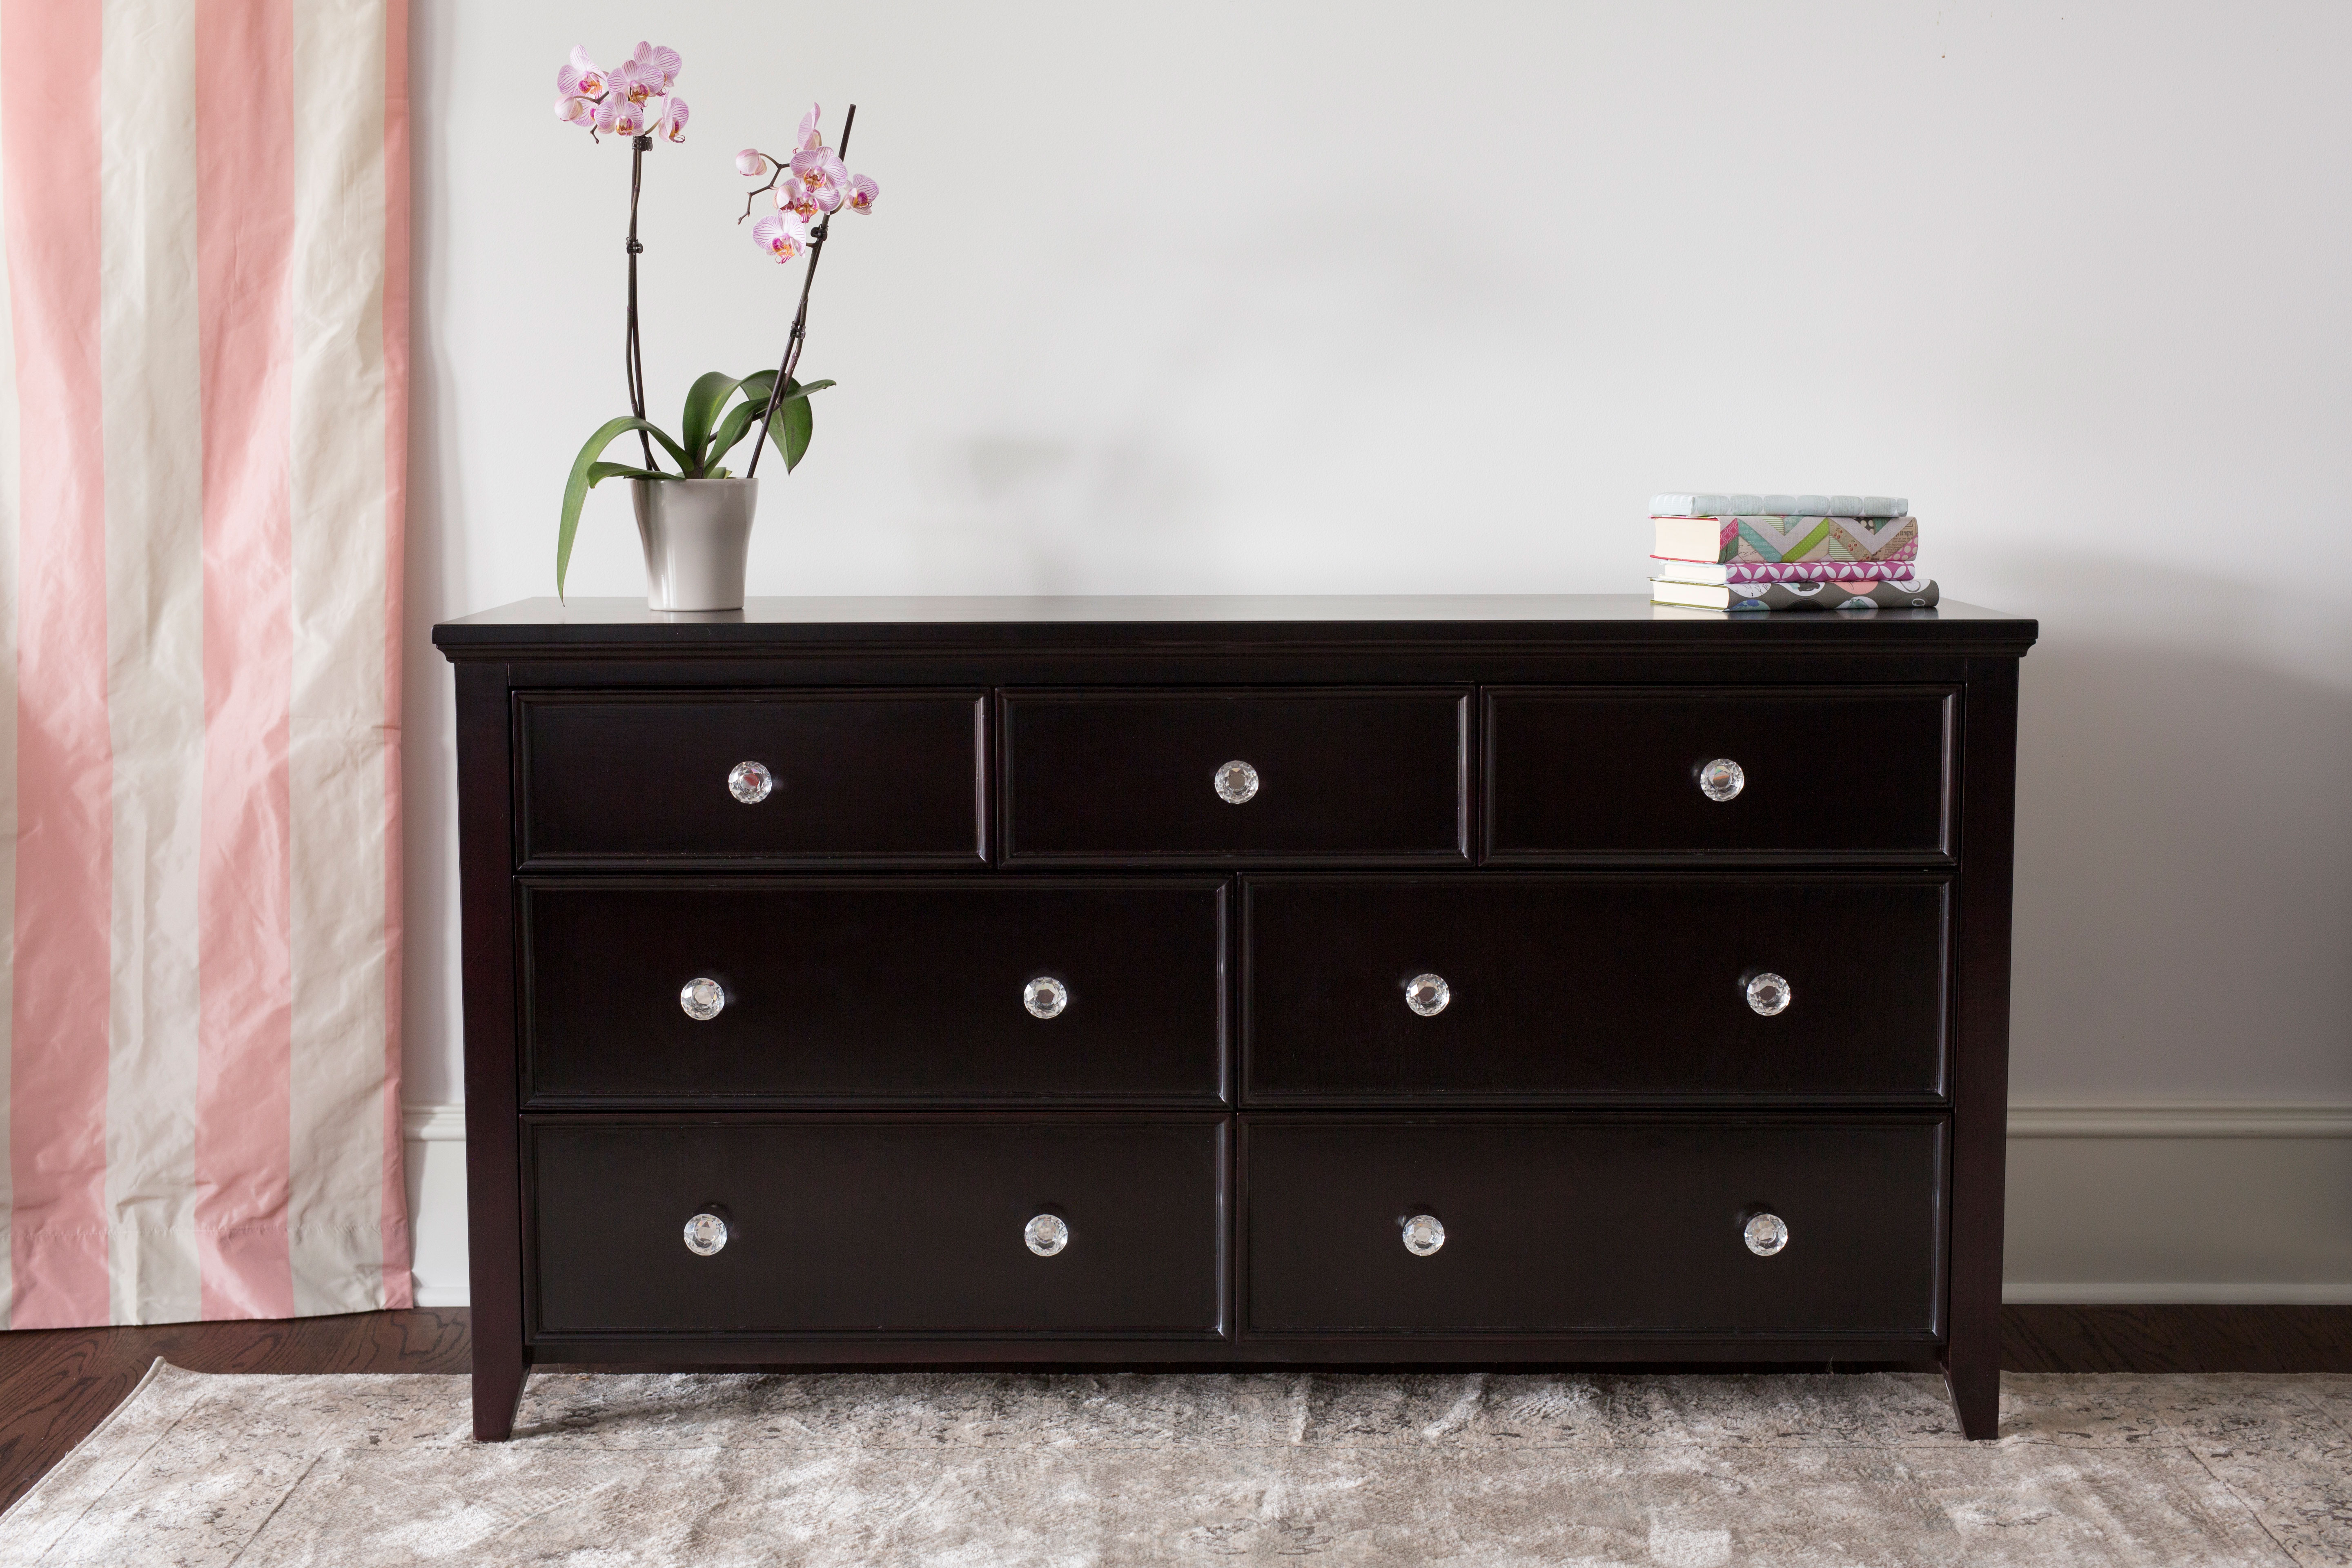 3 Over 4 Drawer Dresser Espresso Craft Bedroom Furniture pertaining to proportions 5760 X 3840